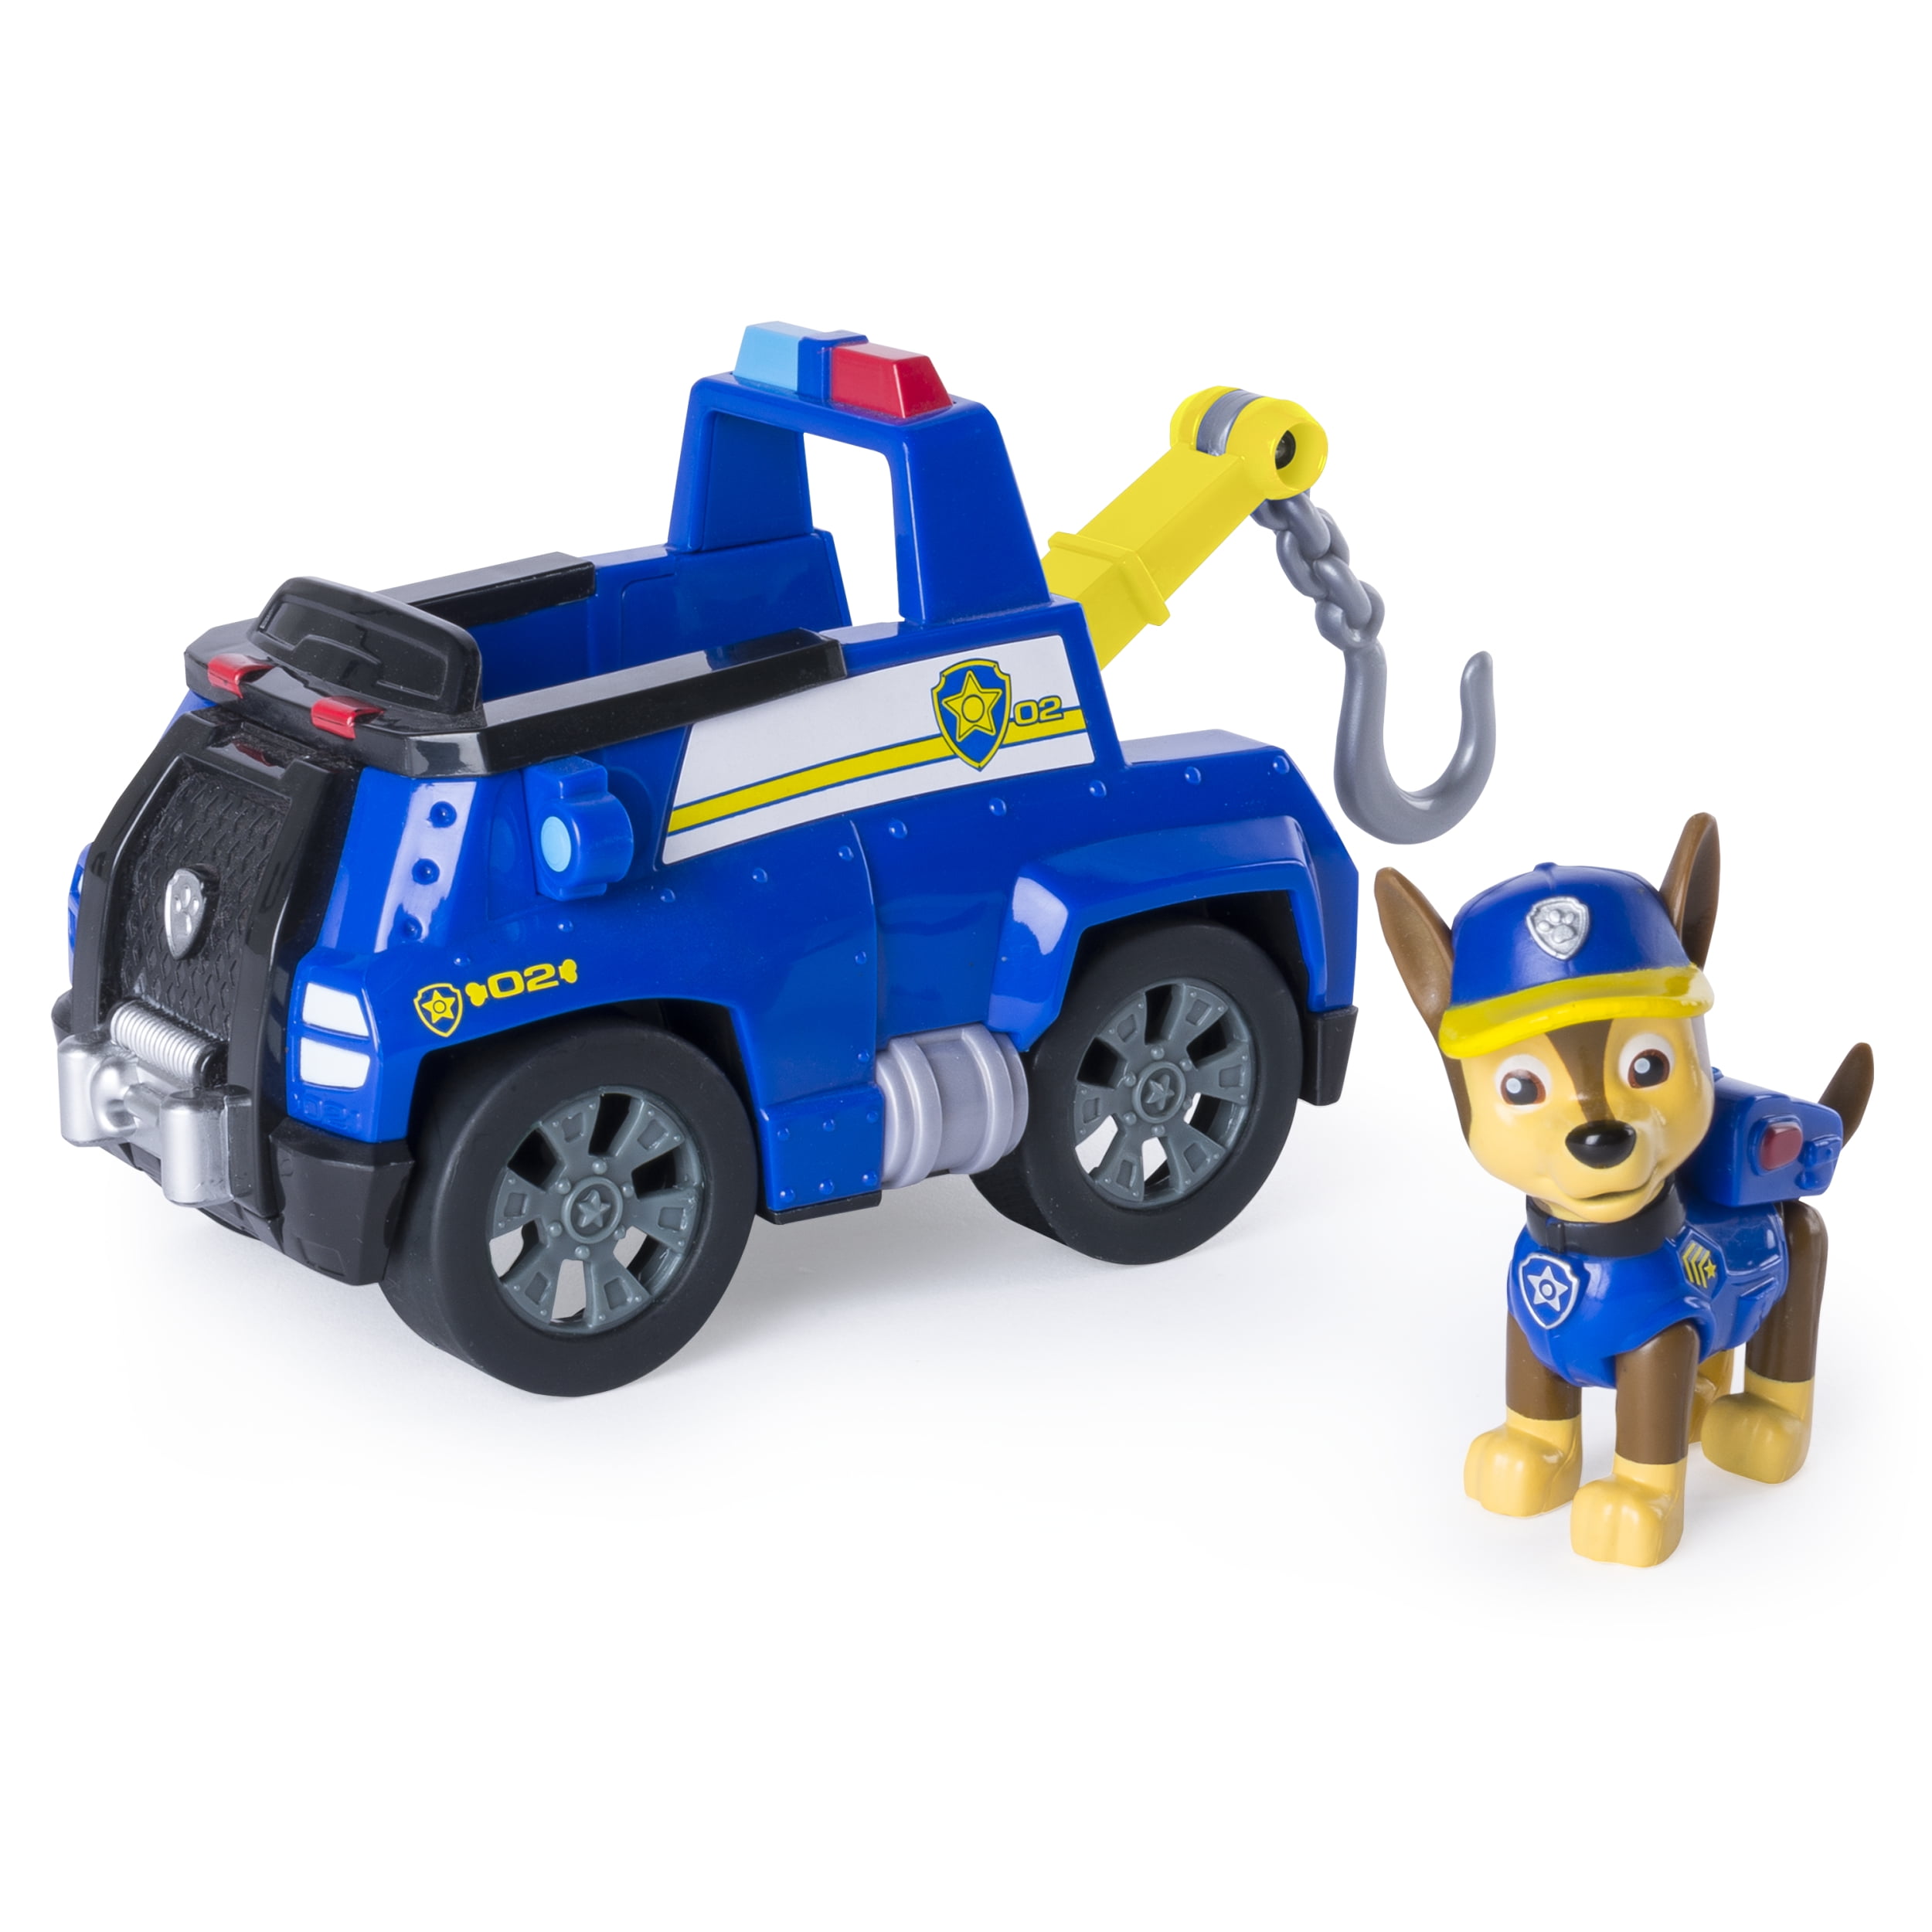 Paw Patrol Chase's Tow Figure and Vehicle - Walmart.com